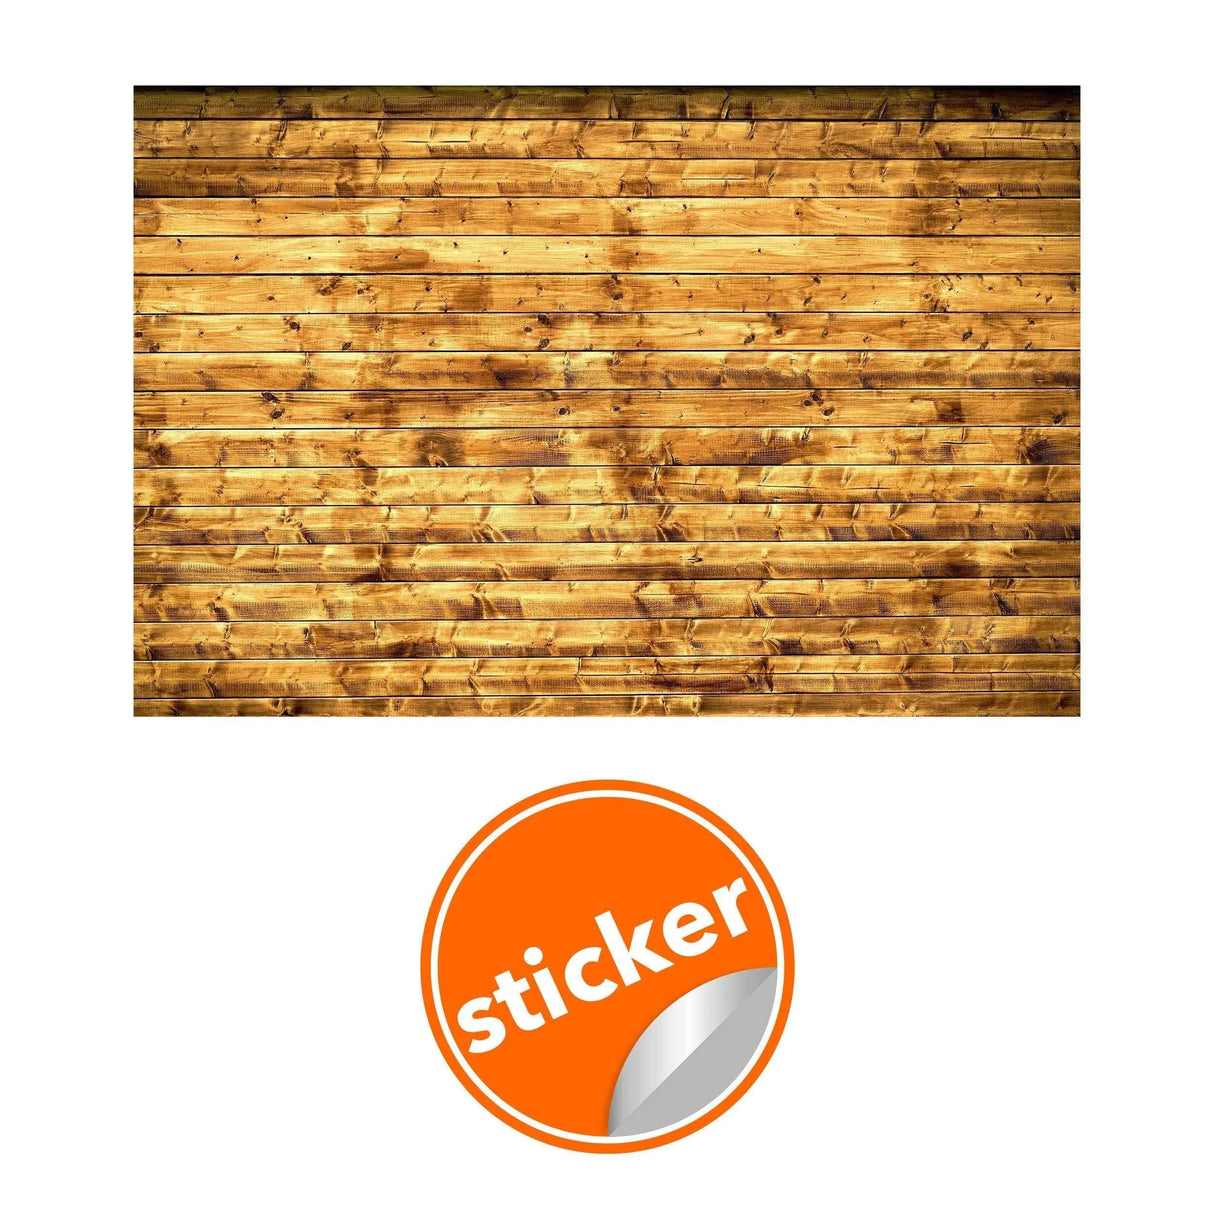 Shiplap Peel And Stick Wallpaper Sticker - Self Adhesive Contact Fake Wood Plank Wall Paper Decal - Removable Wooden Vinyl For Bedroom Room - Decords